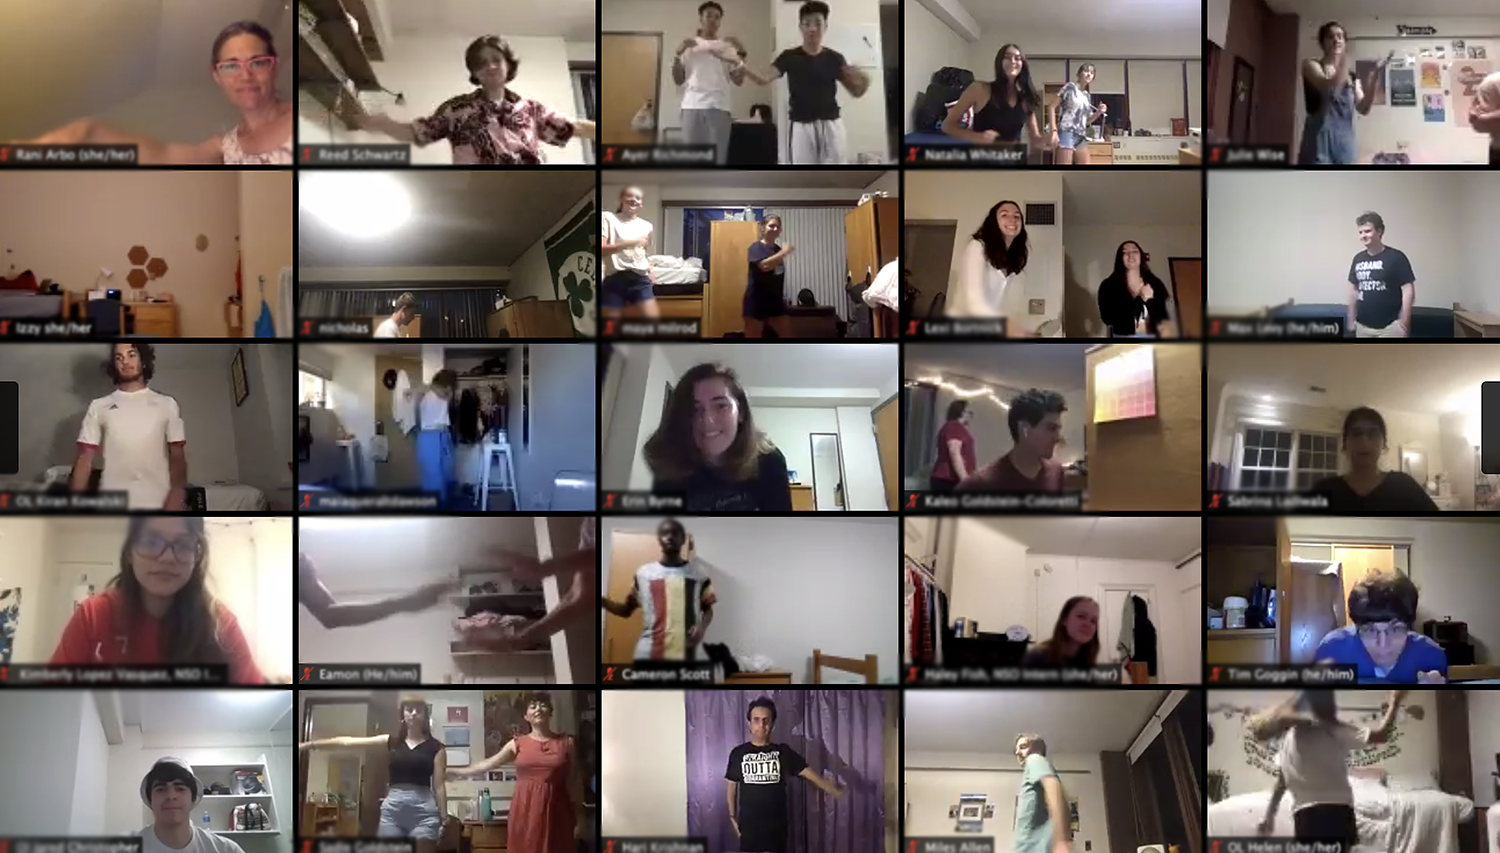 While the experience is usually done in-person on Andrus Field, this year the choreographers taught the students movements through 25-minute virtual breakout groups. At the end, the groups joined together and made a final performance set to the same music.